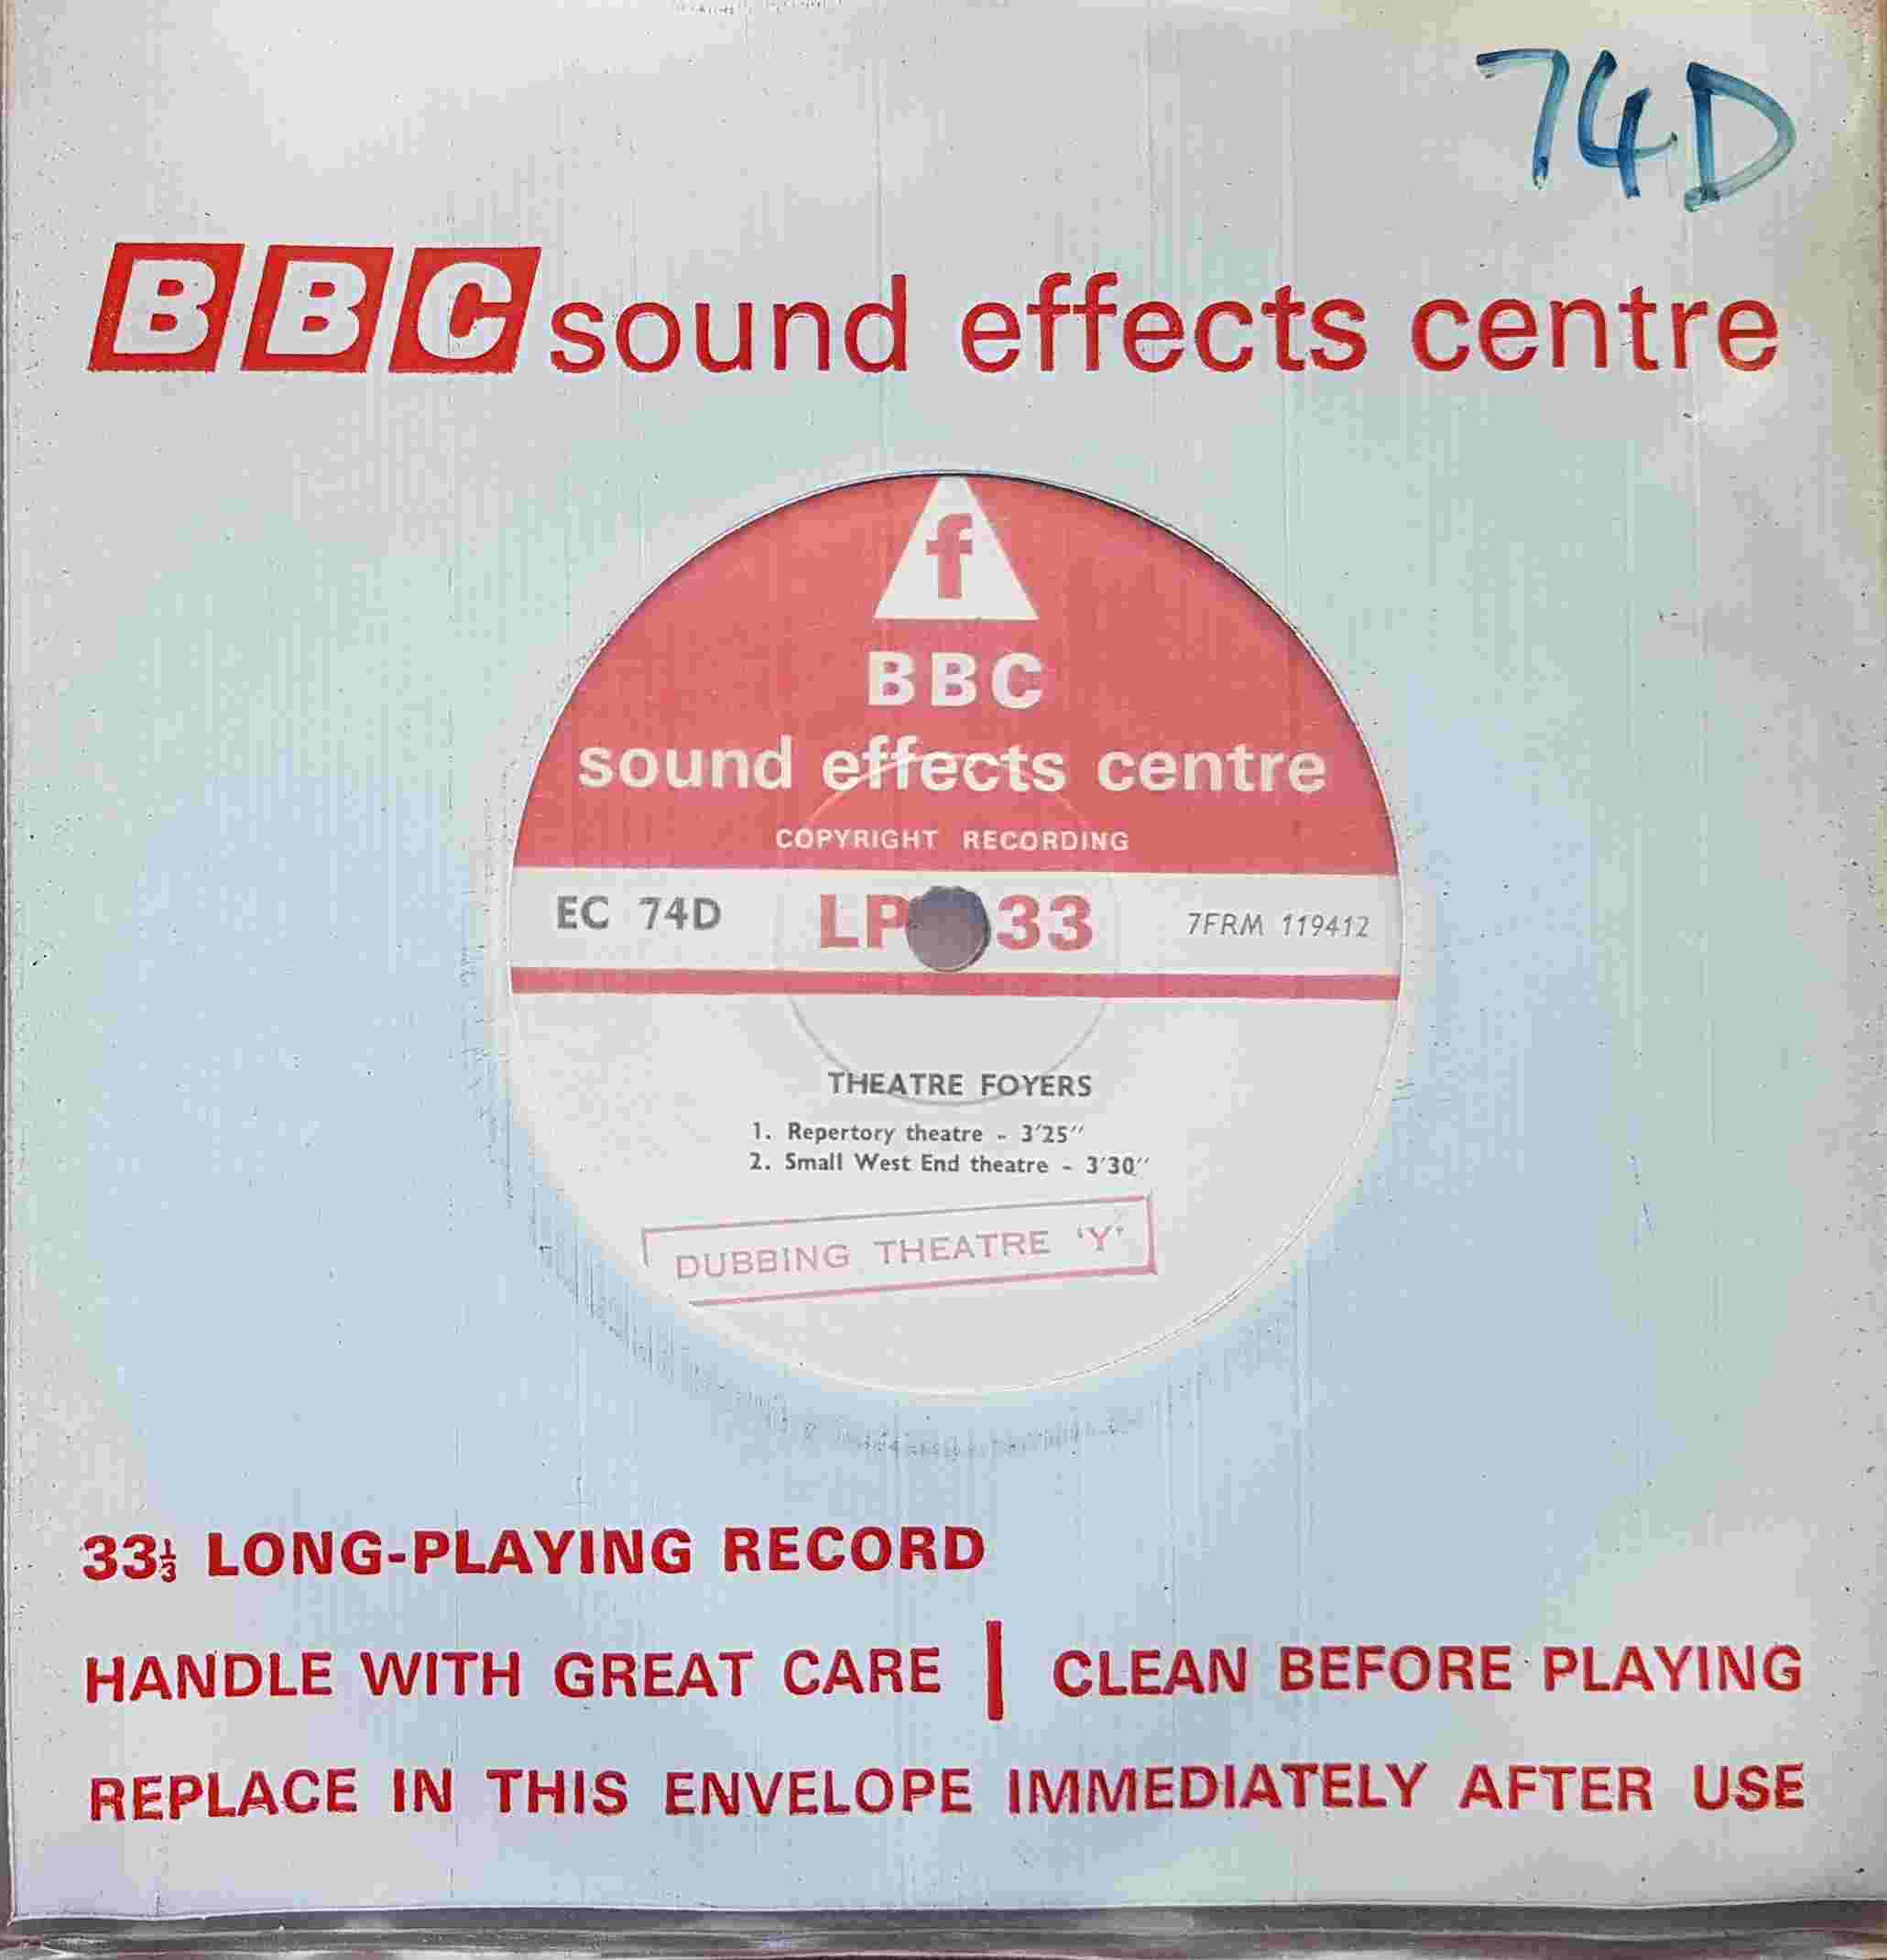 Picture of EC 74D Theatre foyers by artist Not registered from the BBC singles - Records and Tapes library